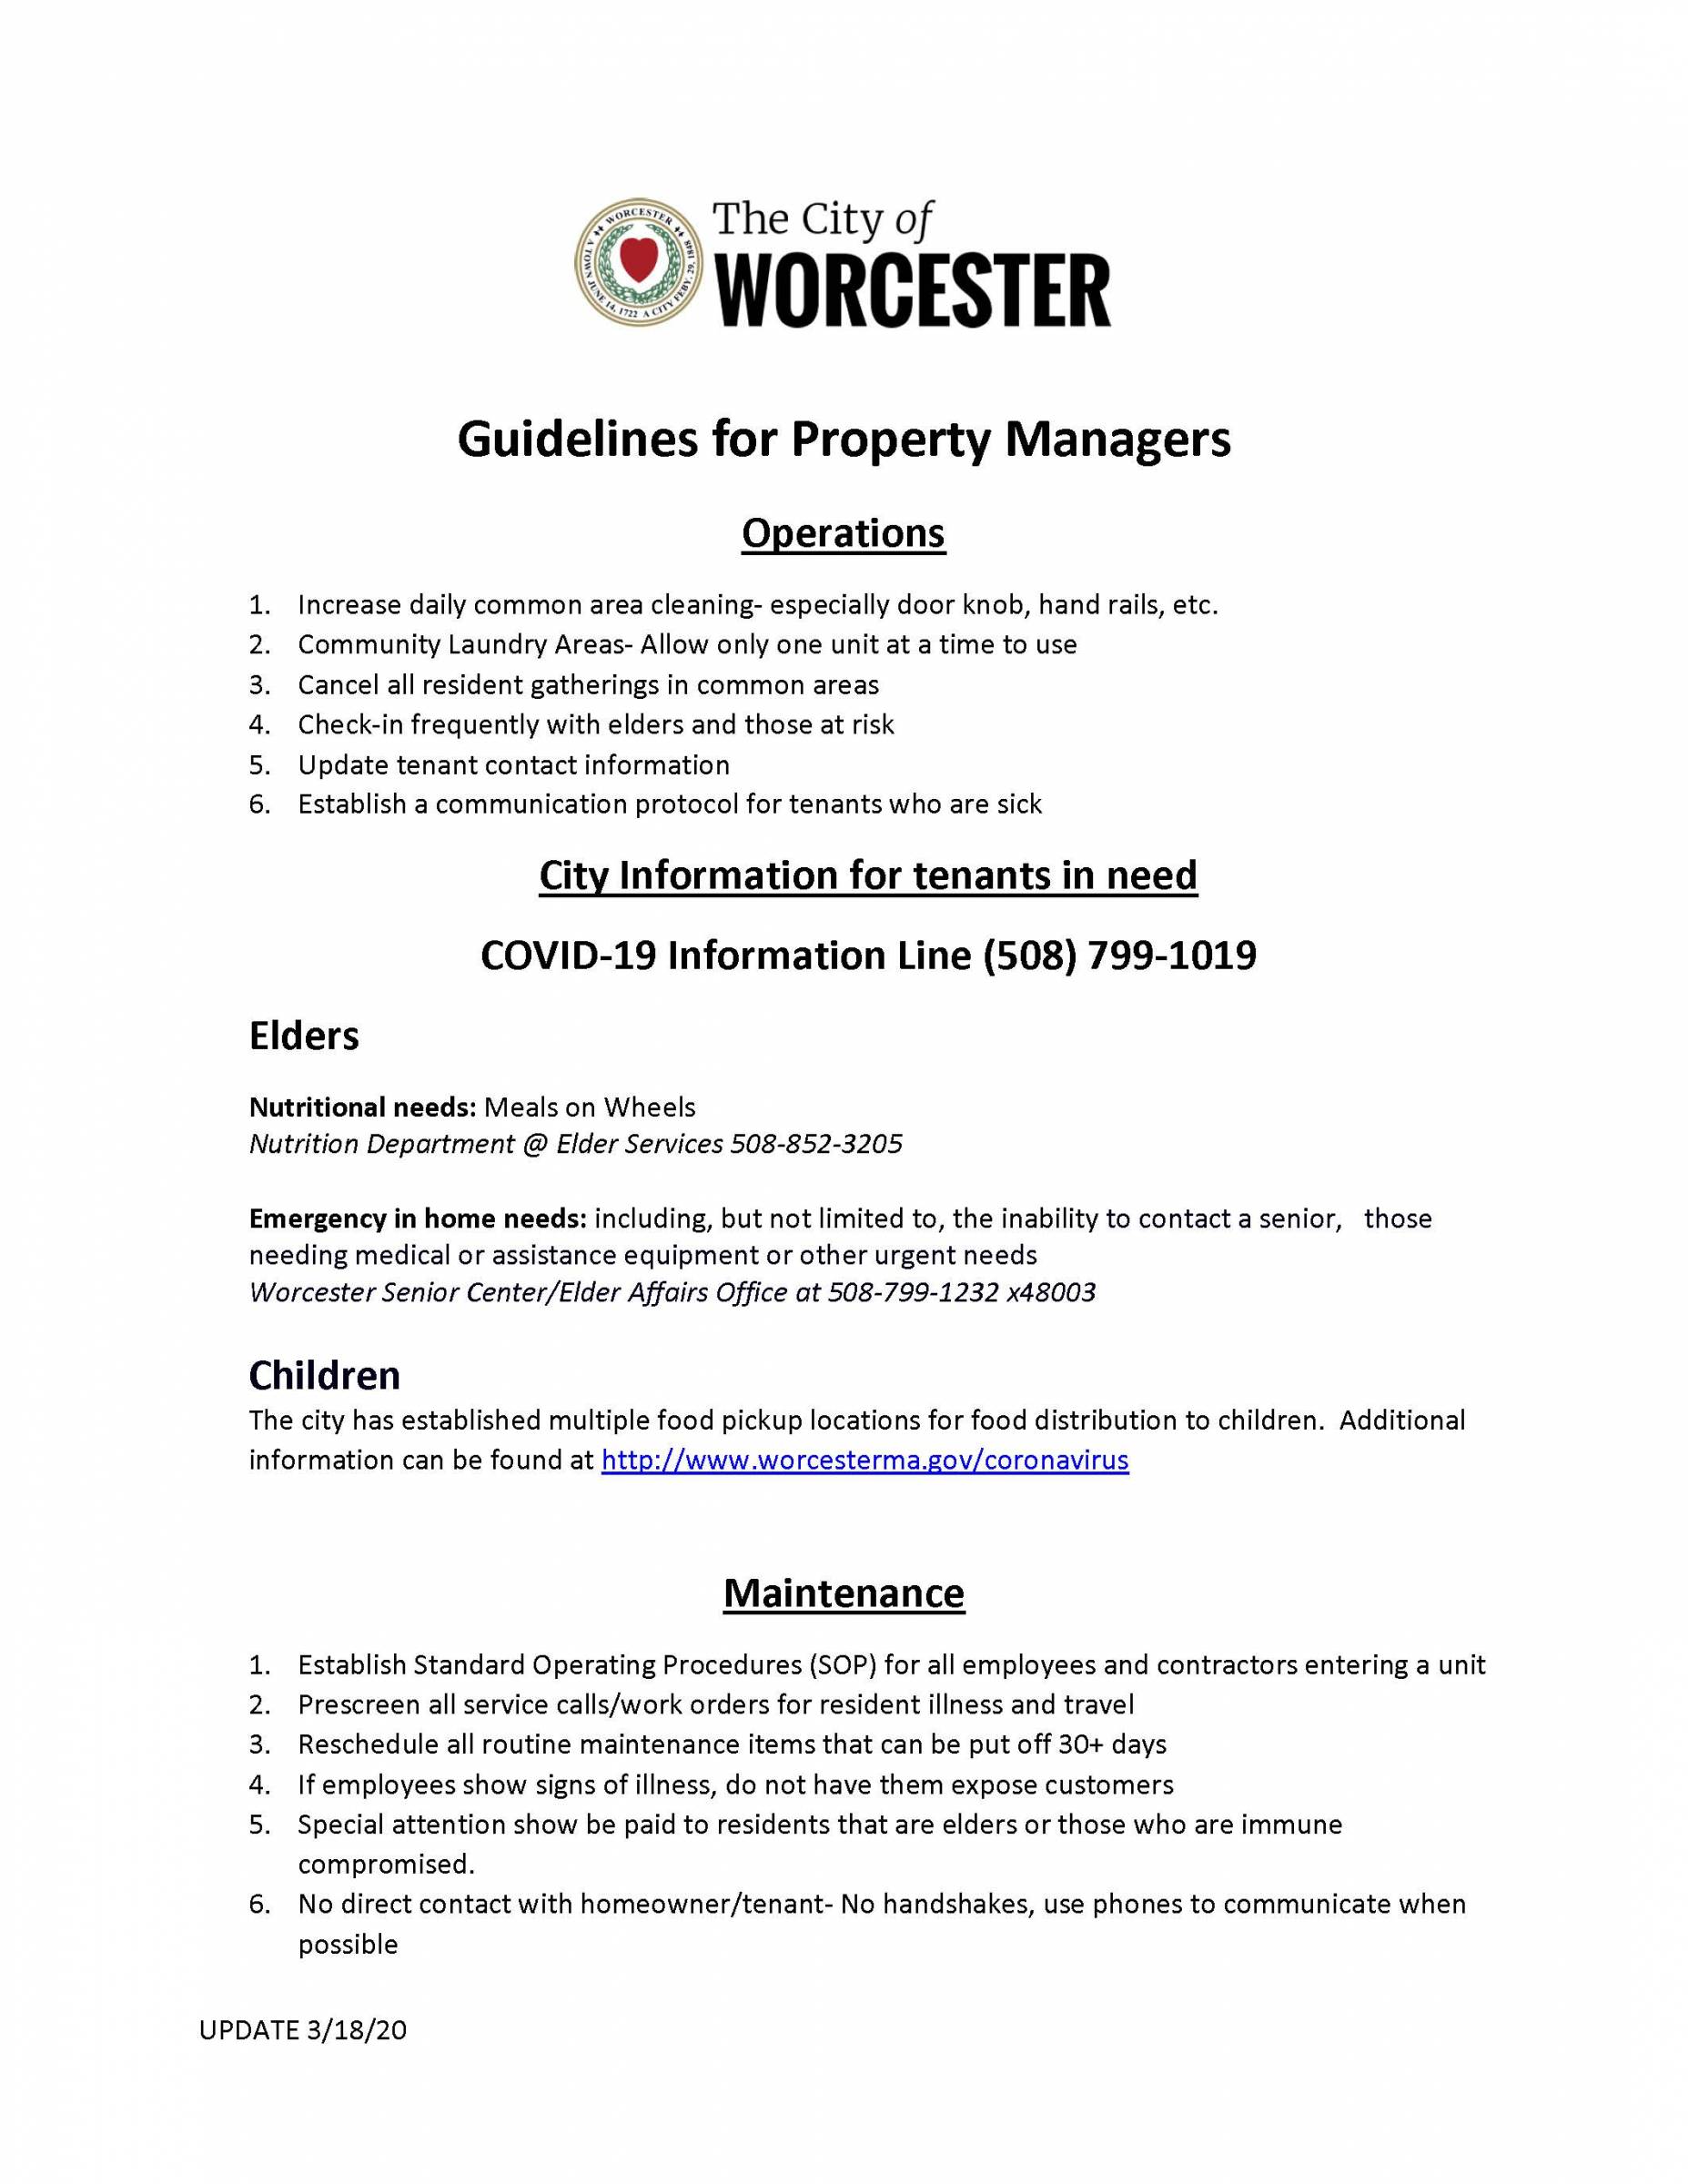 City of Worcester: Guidelines for Property Managers 